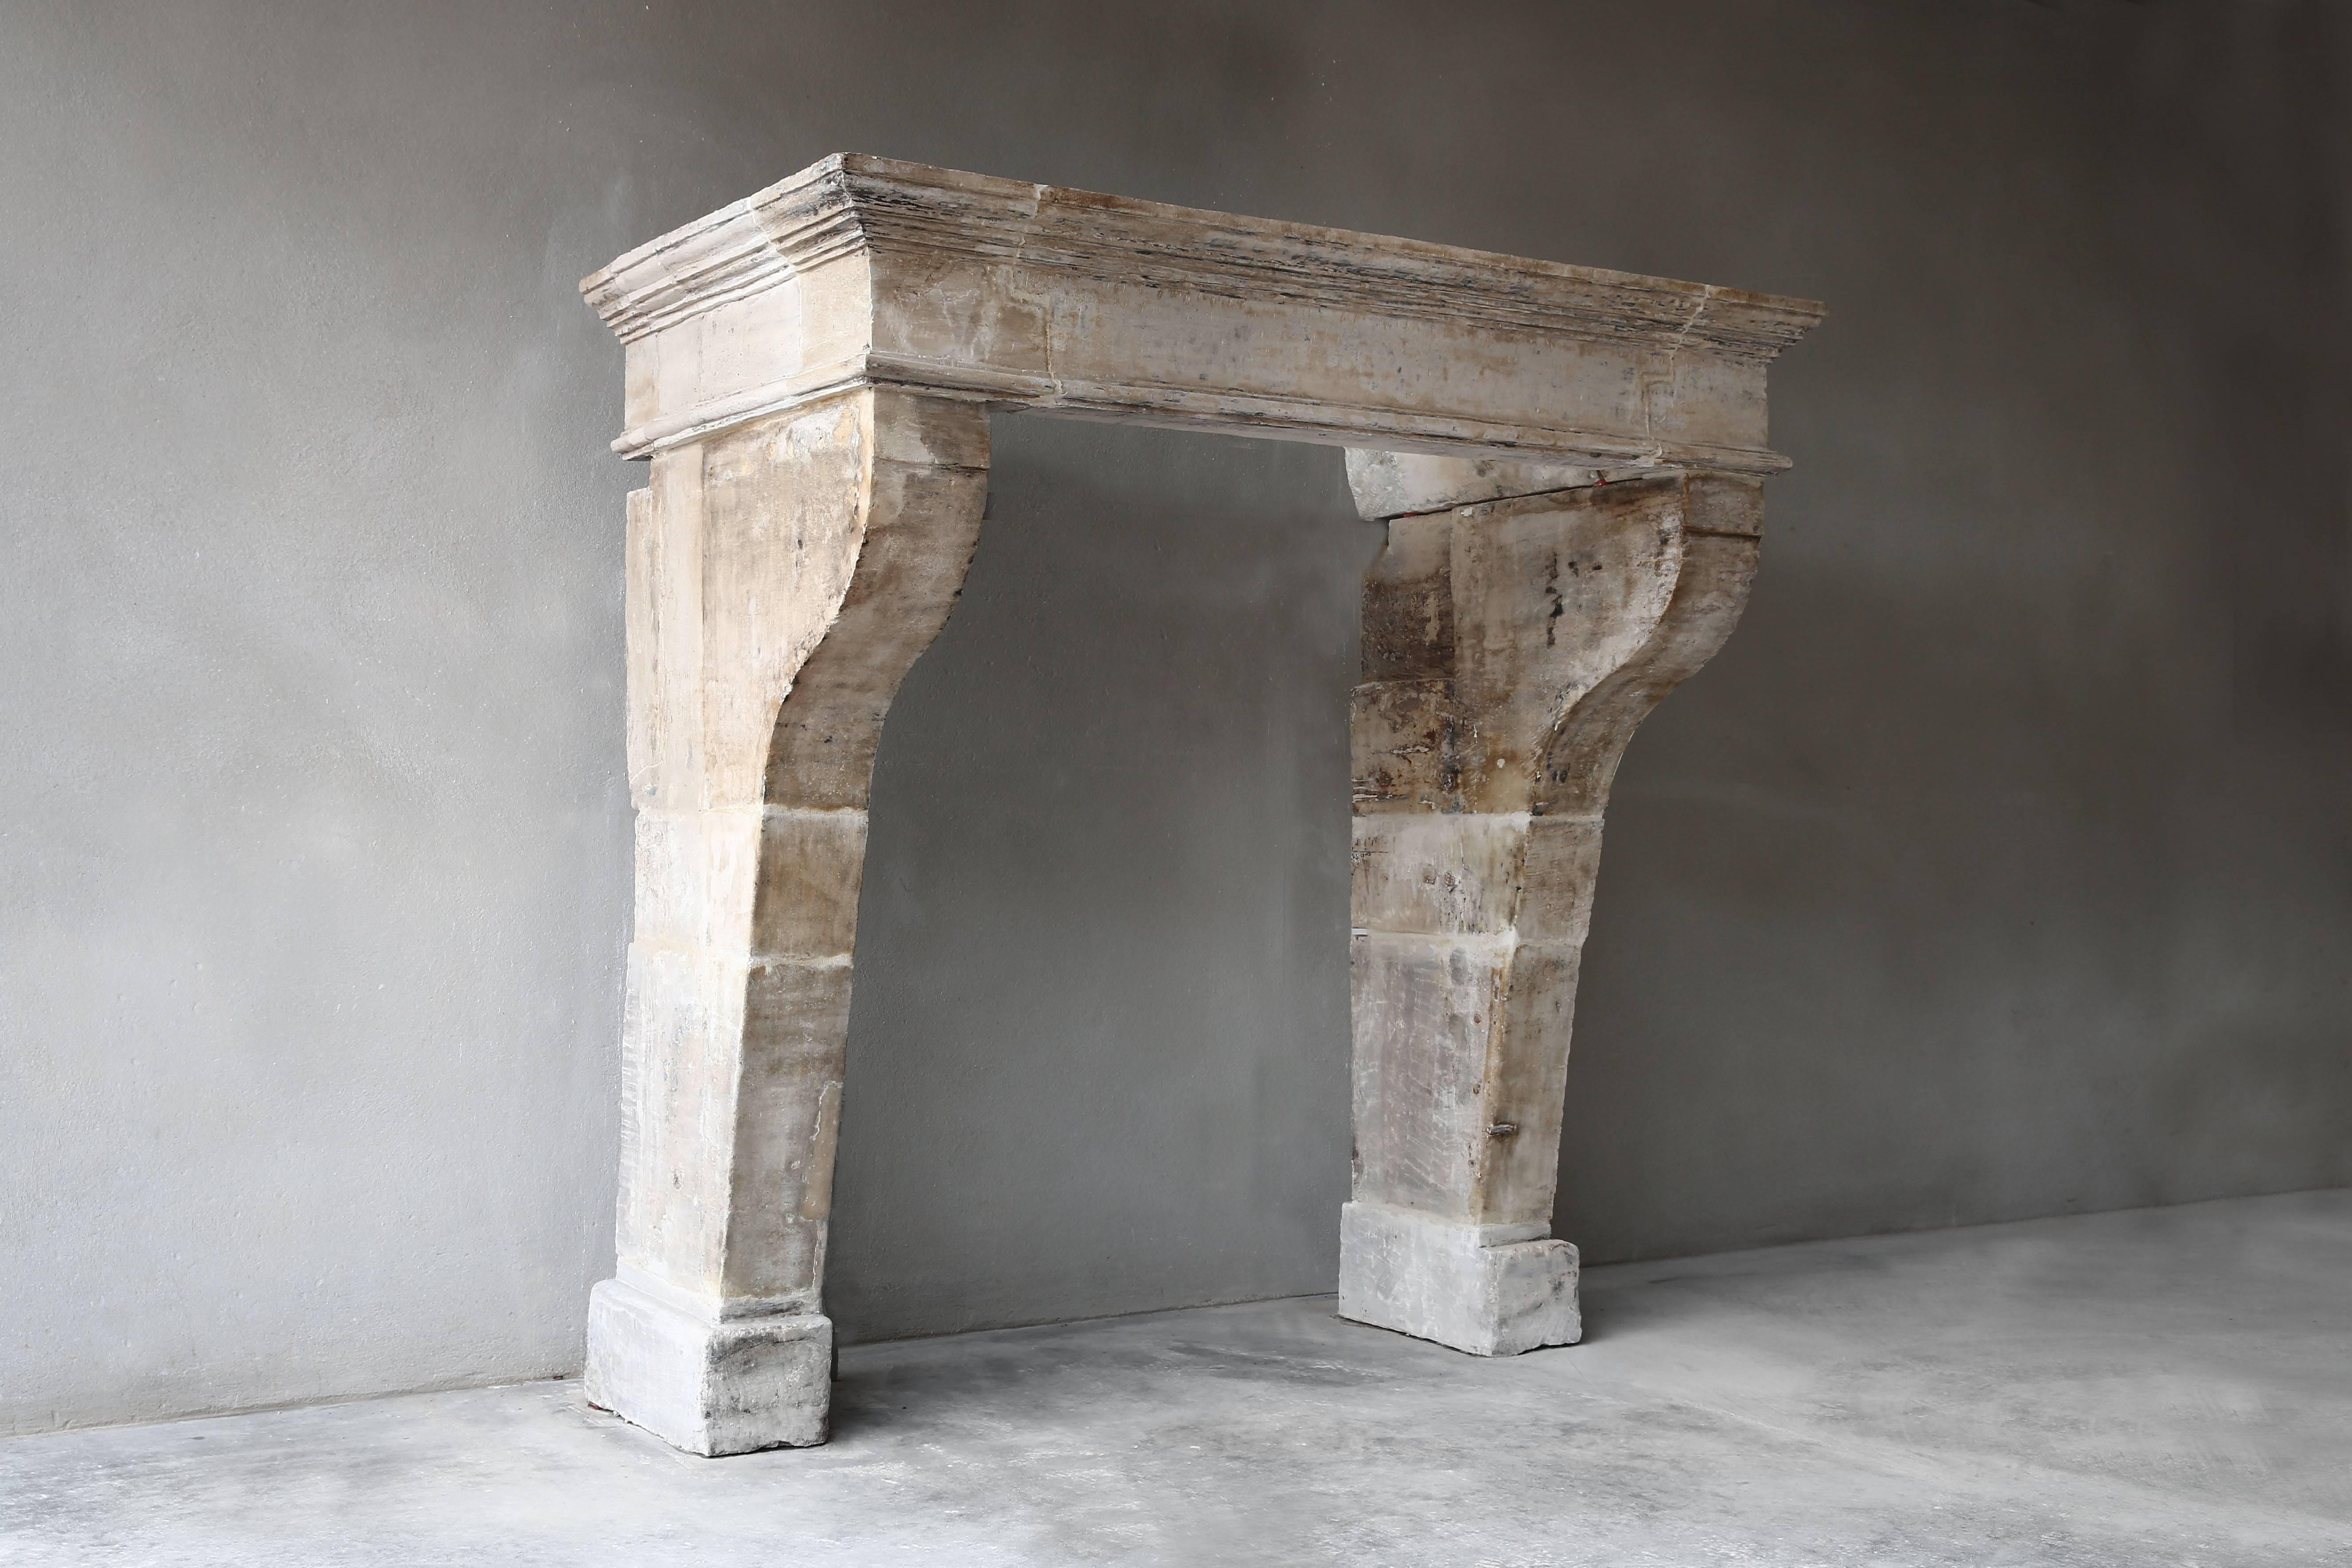 Recently we have found this beautiful stylish antique fireplace in France. Characteristic is the quiet style of the fireplace, also called Campagnarde. The cornice has several recesses, making this cheminee more graceful. A fireplace with lots of